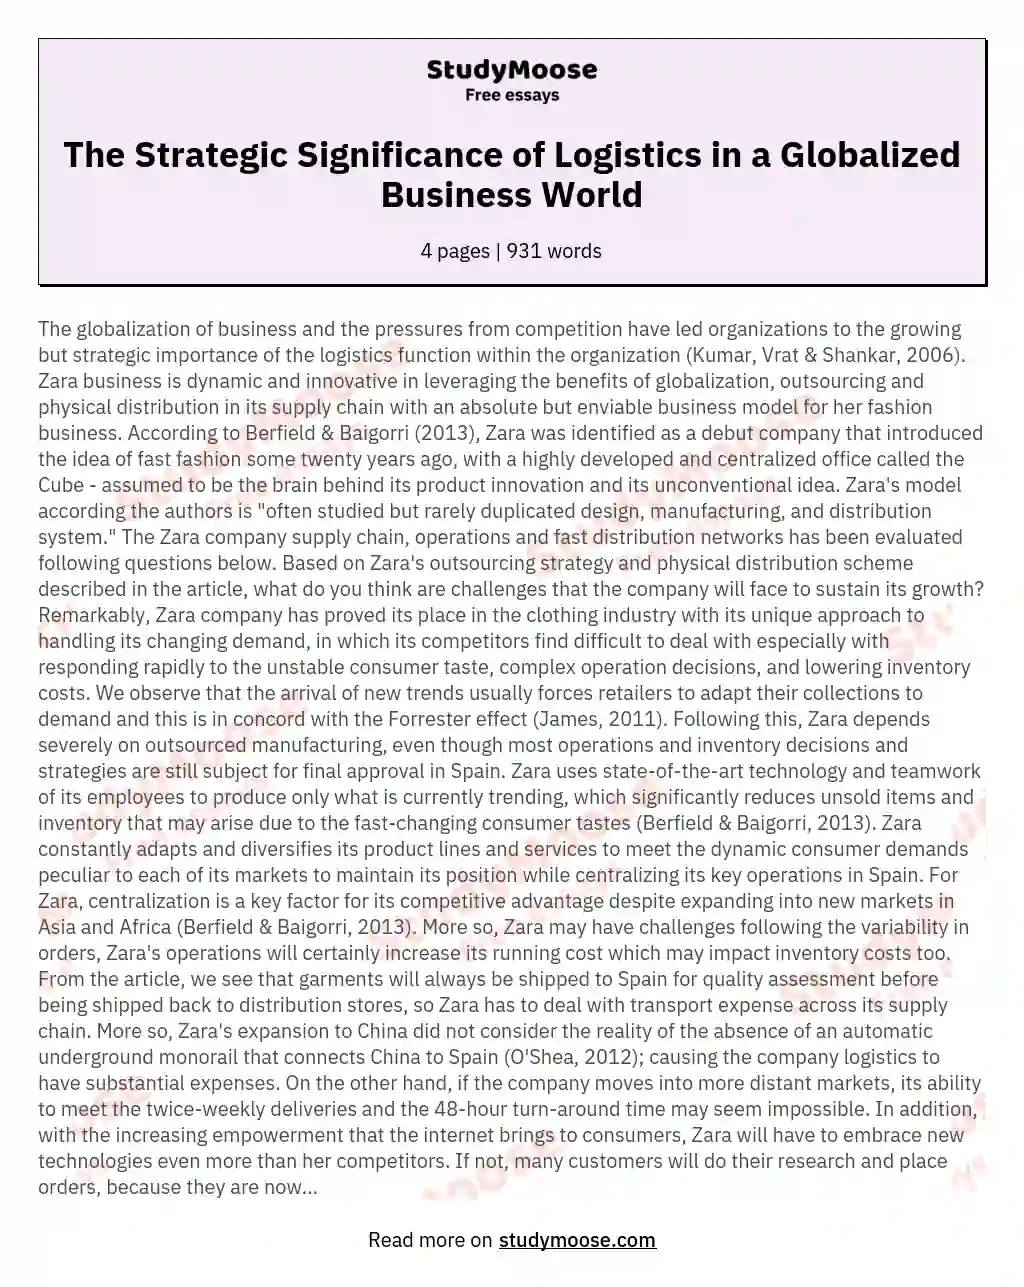 The Strategic Significance of Logistics in a Globalized Business World essay